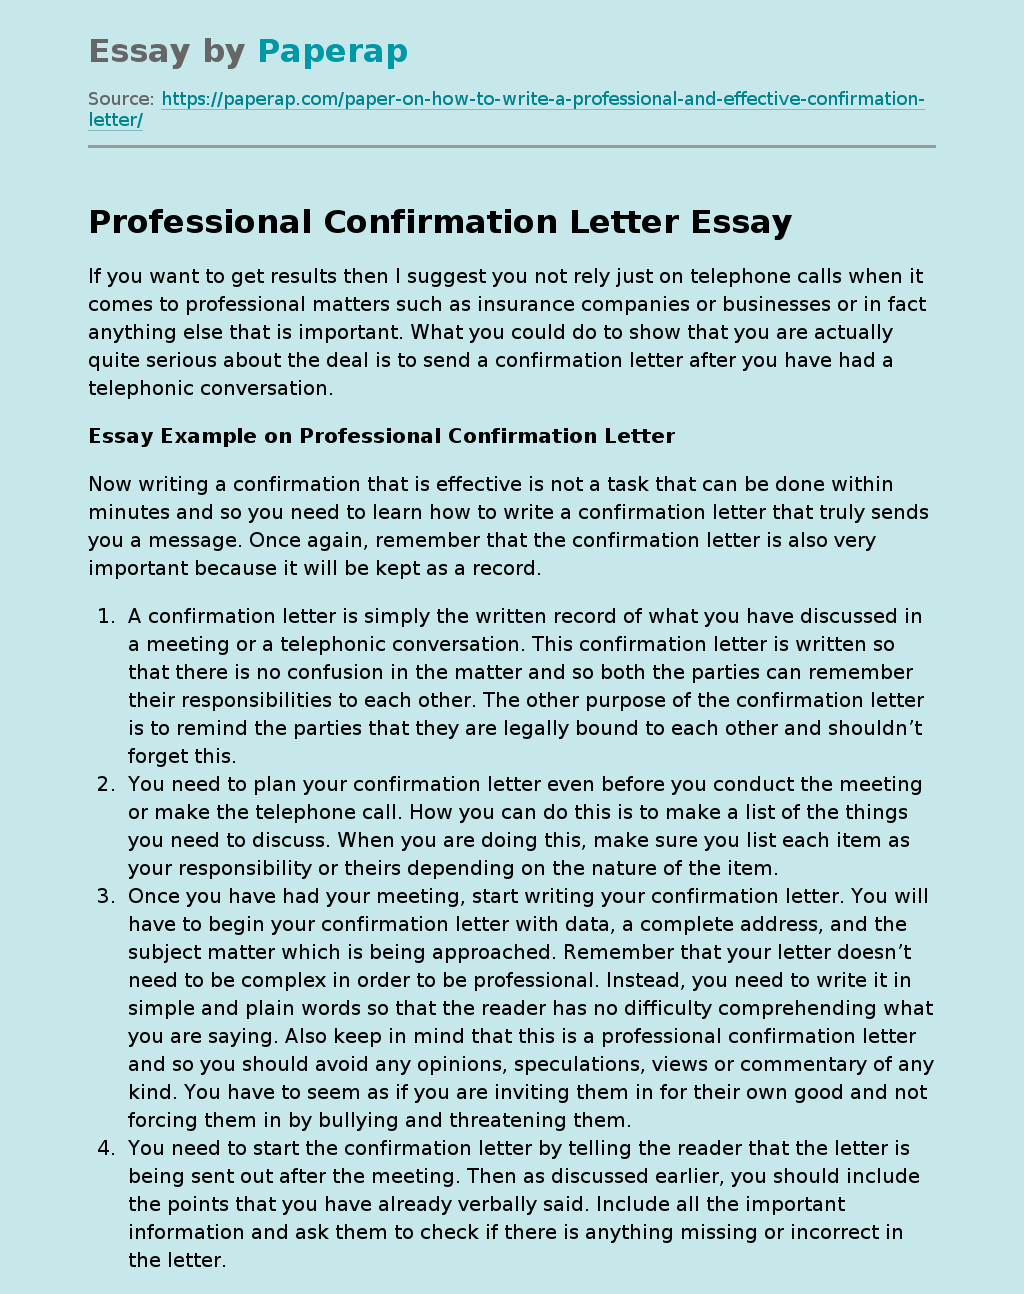 Professional Confirmation Letter